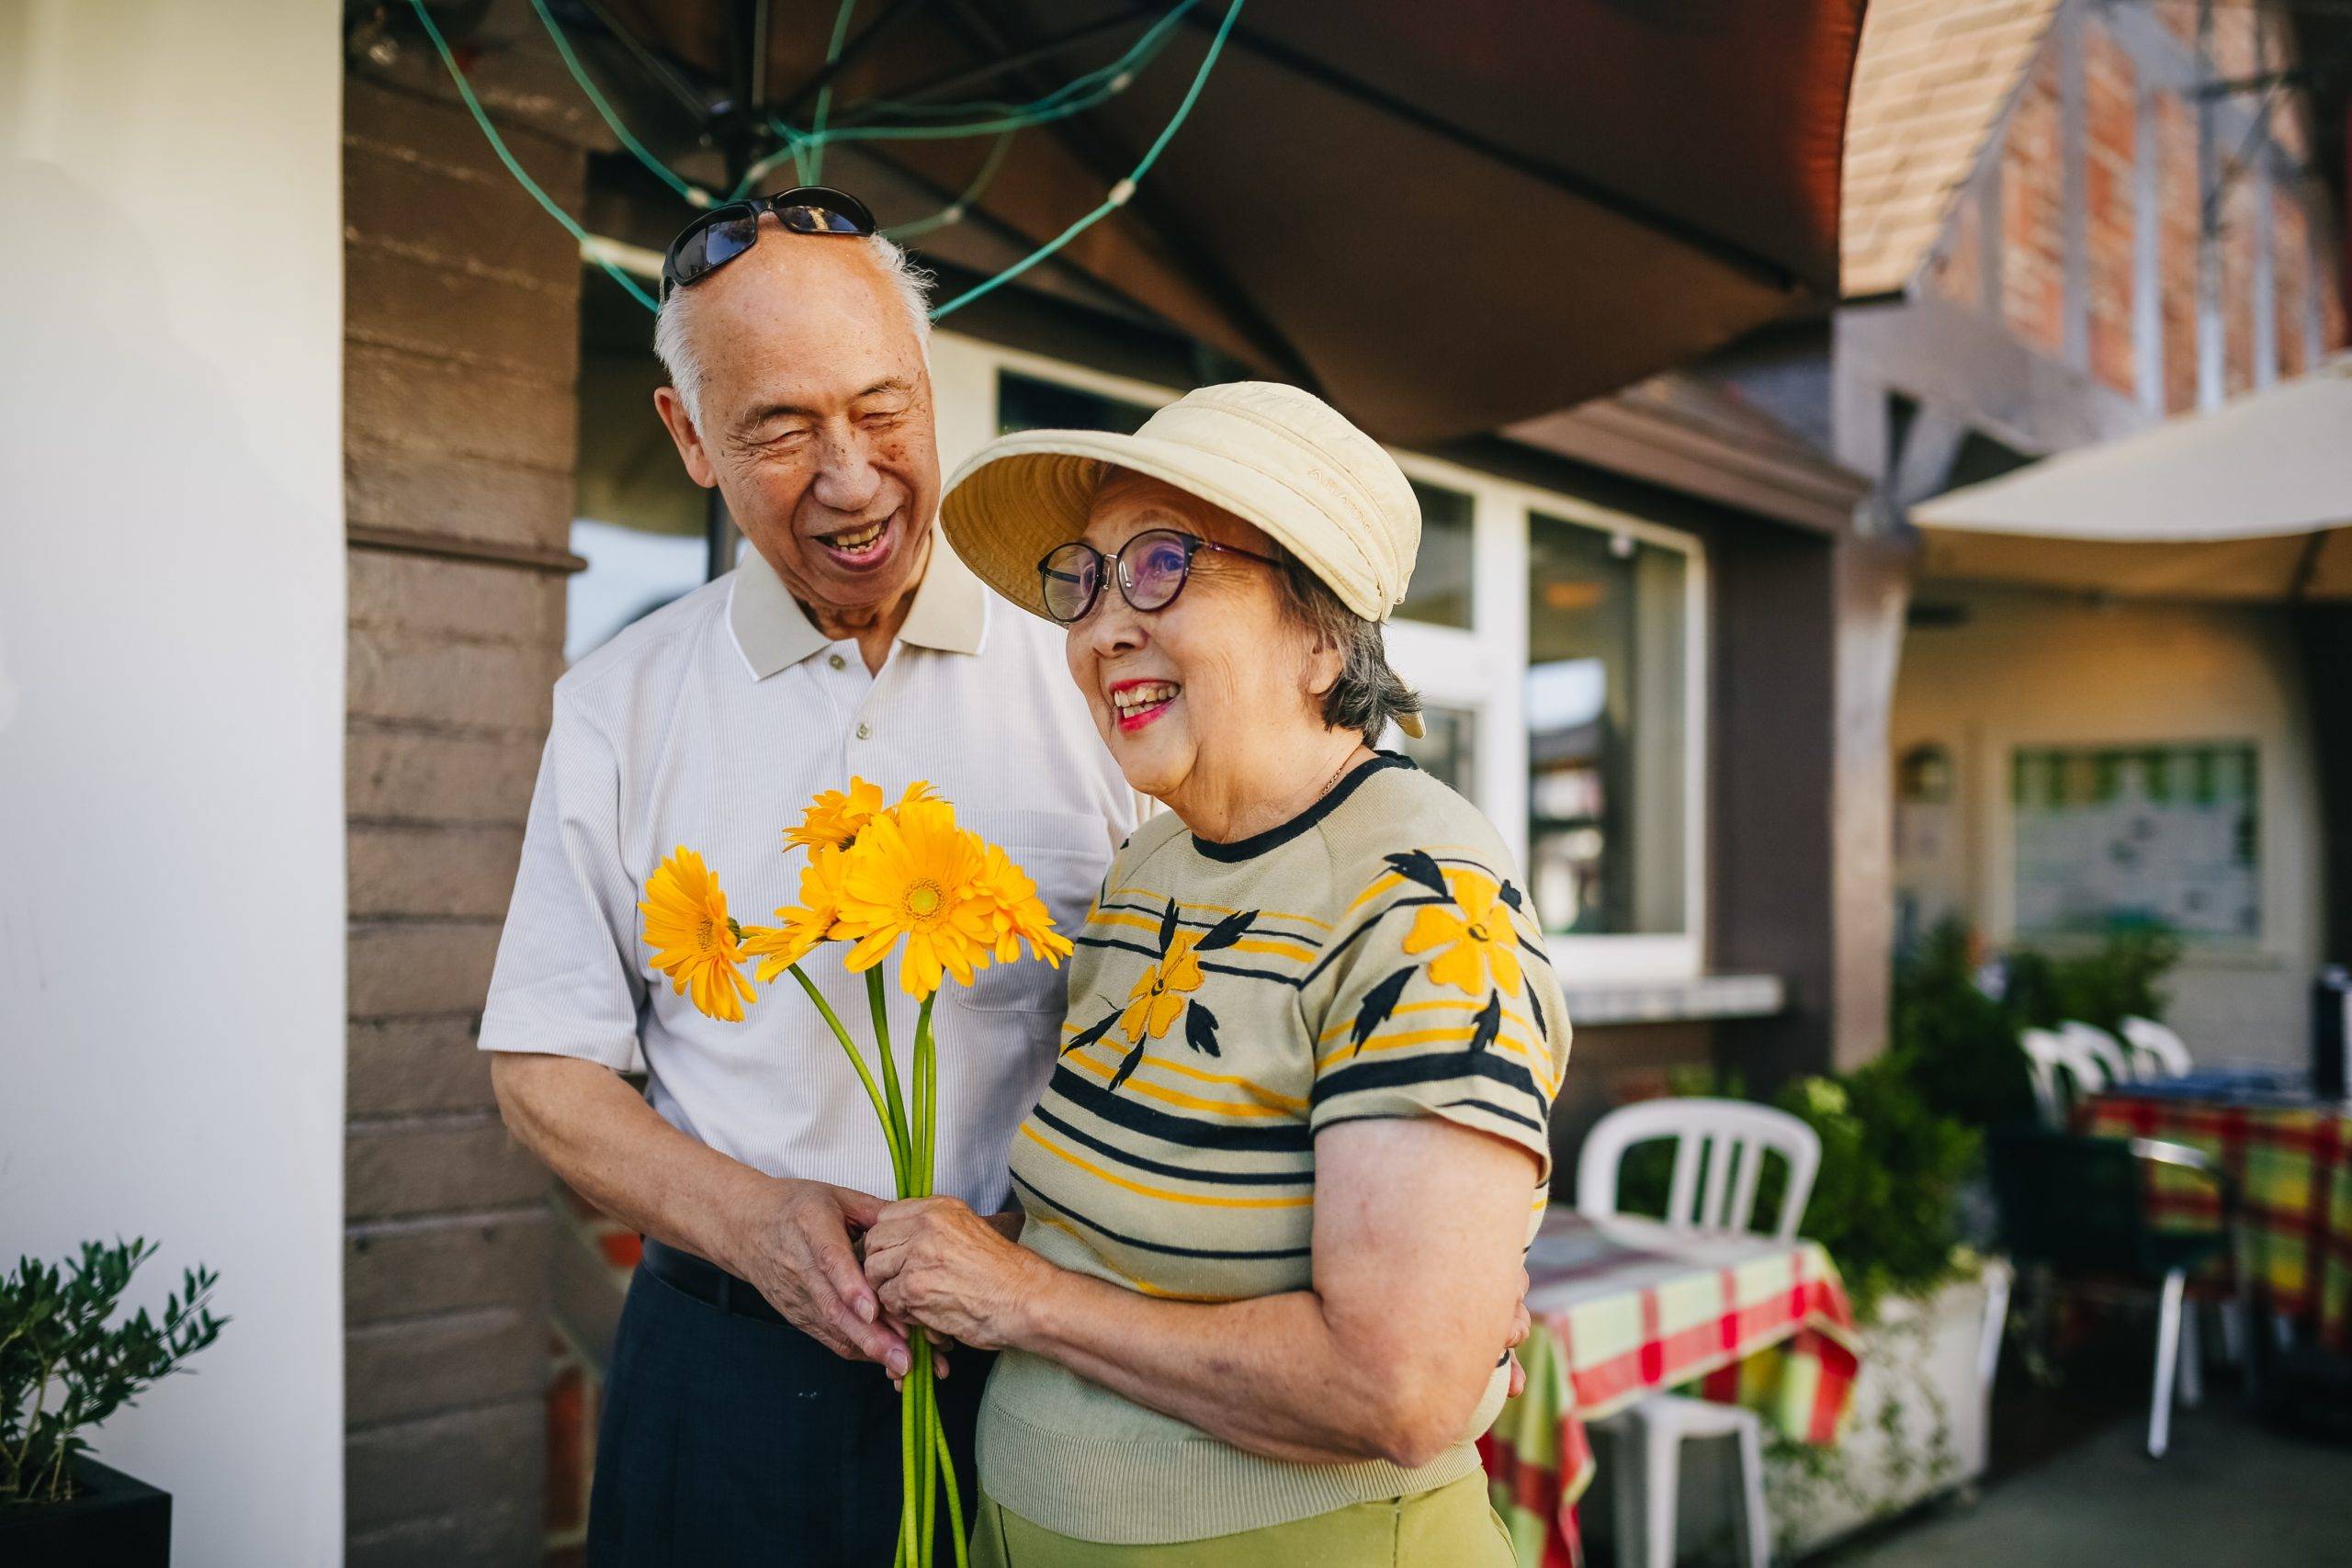 elderly man and woman outside with flowers, smiling